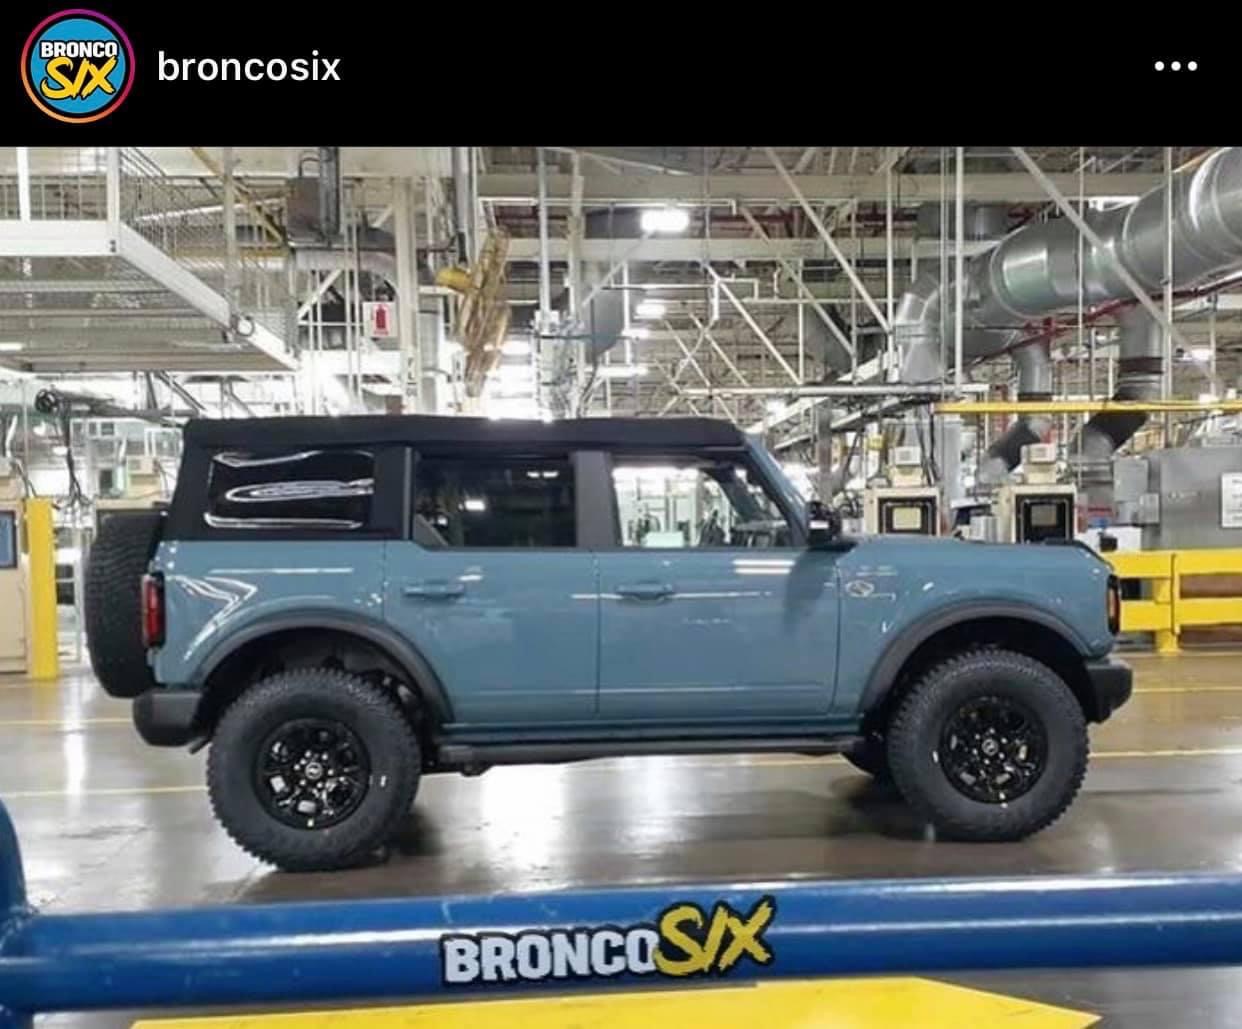 Ford Bronco 4 Door Sasquatch Picture Thread (No CGI, only real pics) 07101BAF-4979-4230-8C54-ABC2982E050D